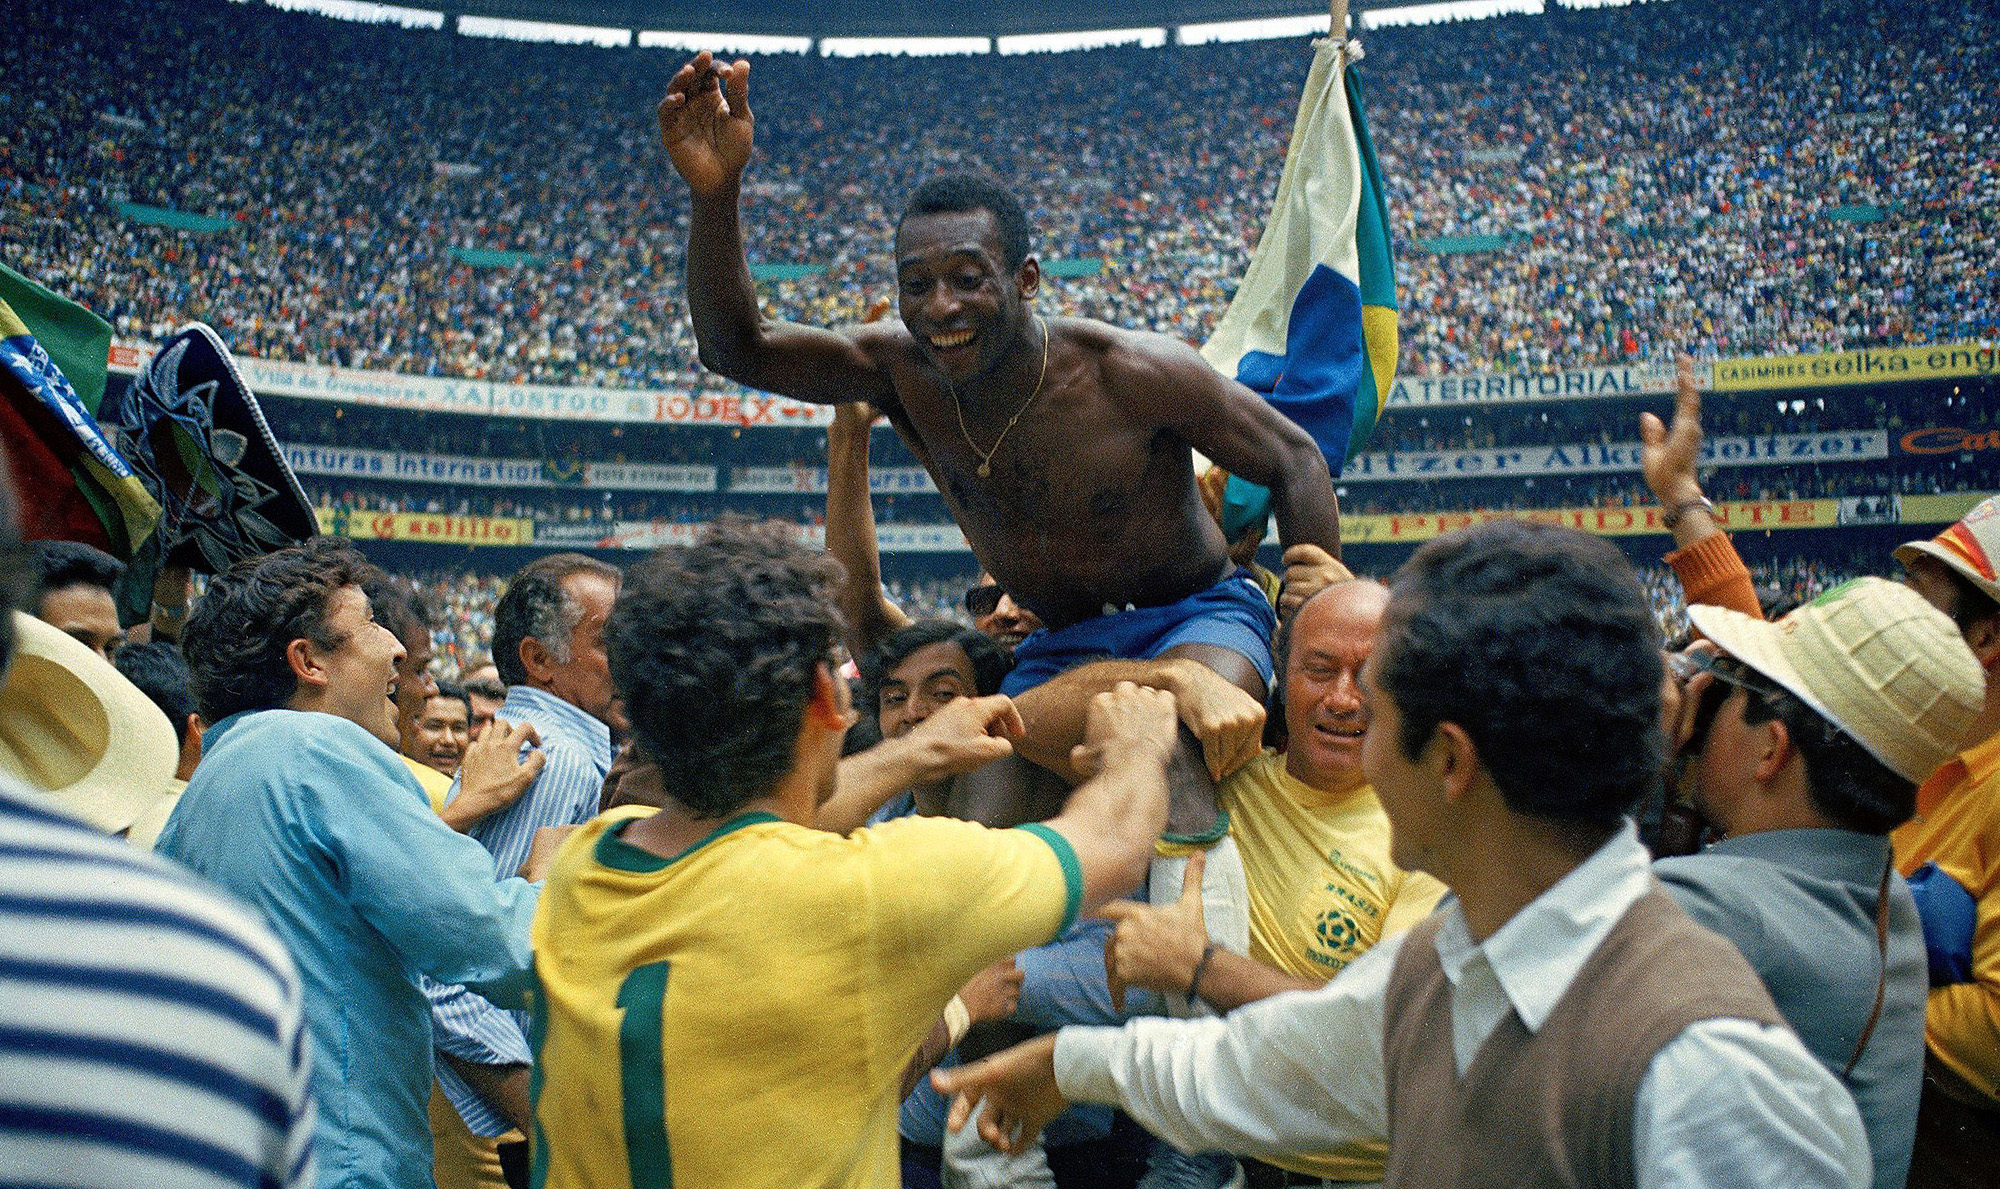 Pele celebrates after winning the 1970 World Cup final against Italy in Mexico City.